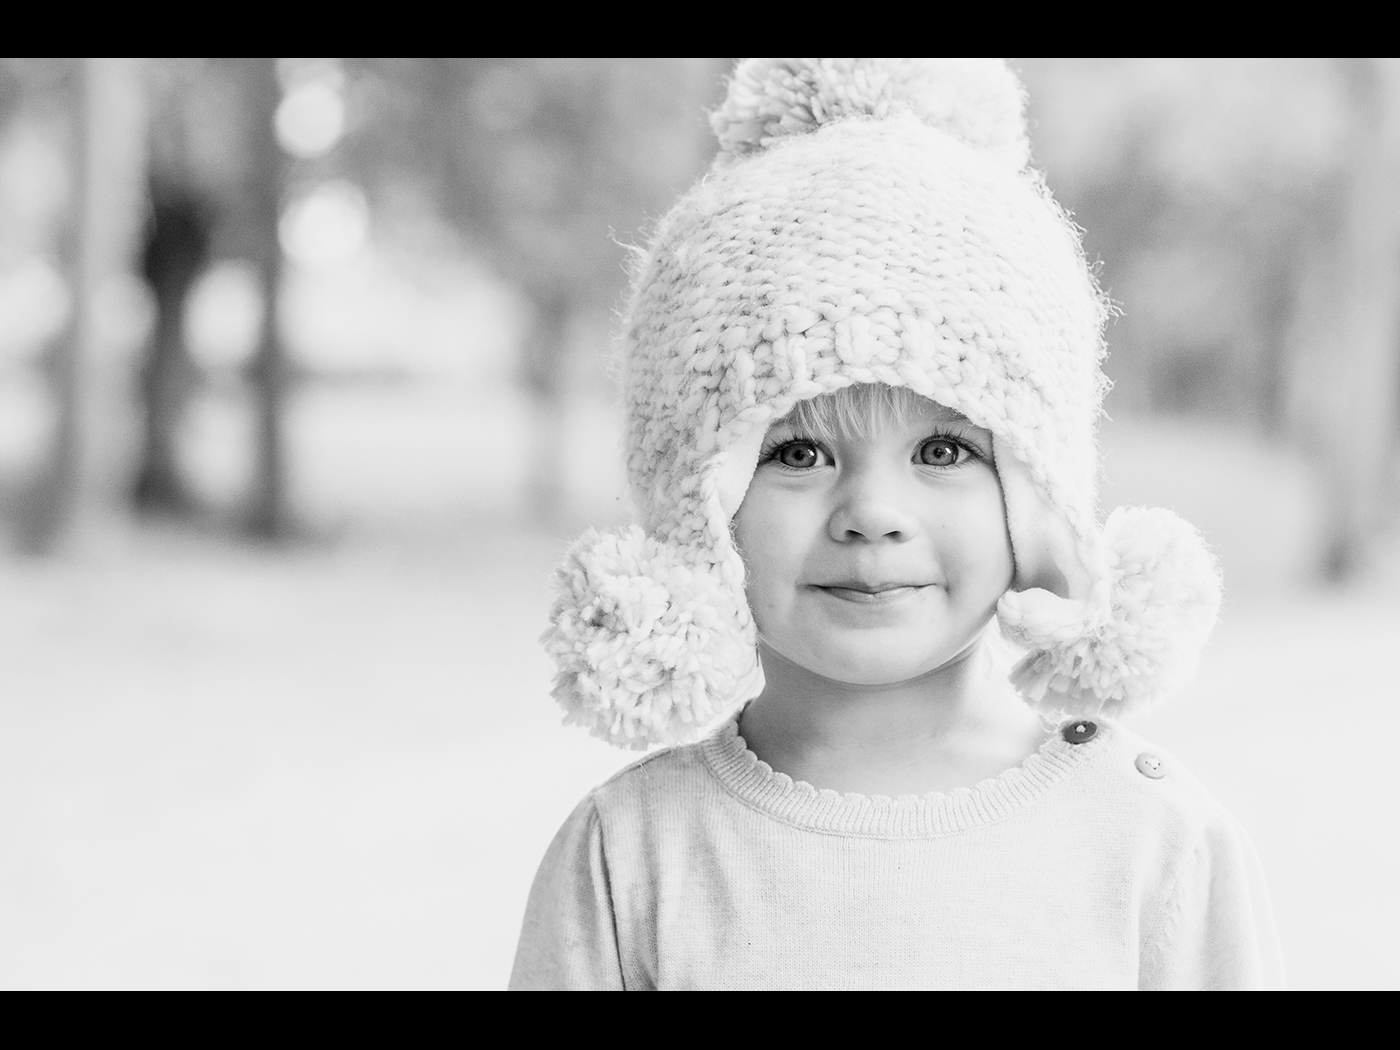 THE GIRL IN THE BOBBLE HAT by Iain Morrison.jpg